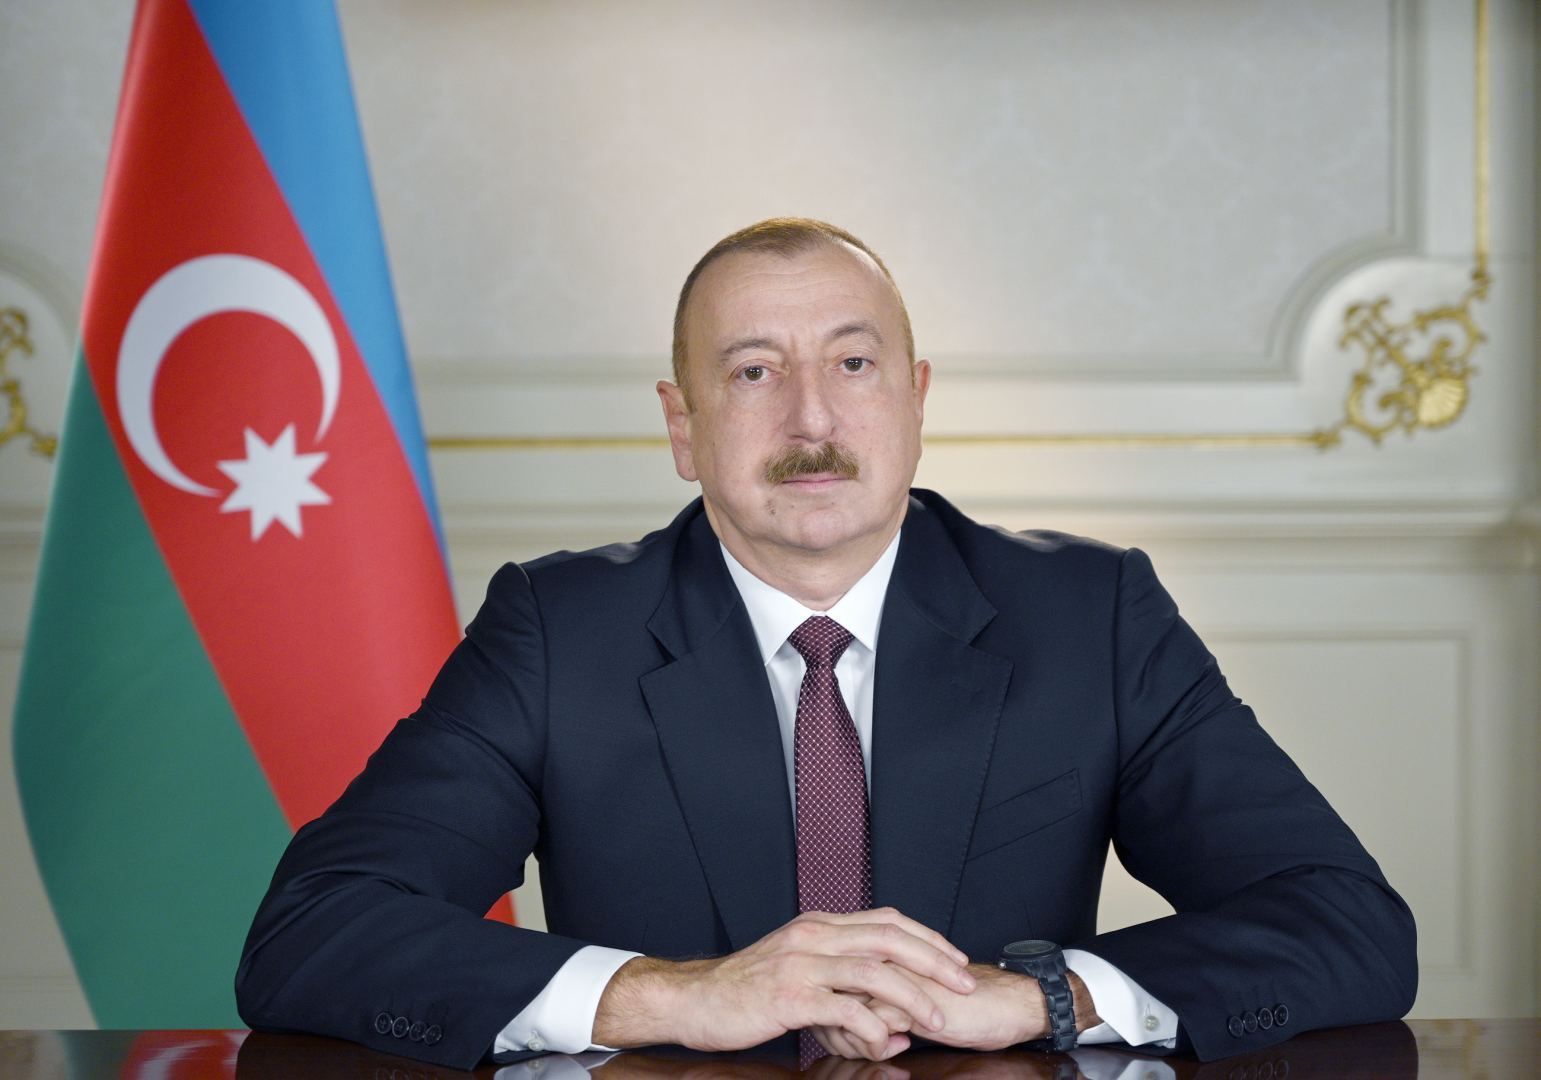 Staff members of Azerbaijan's Ministry of Emergency Situations awarded – decree